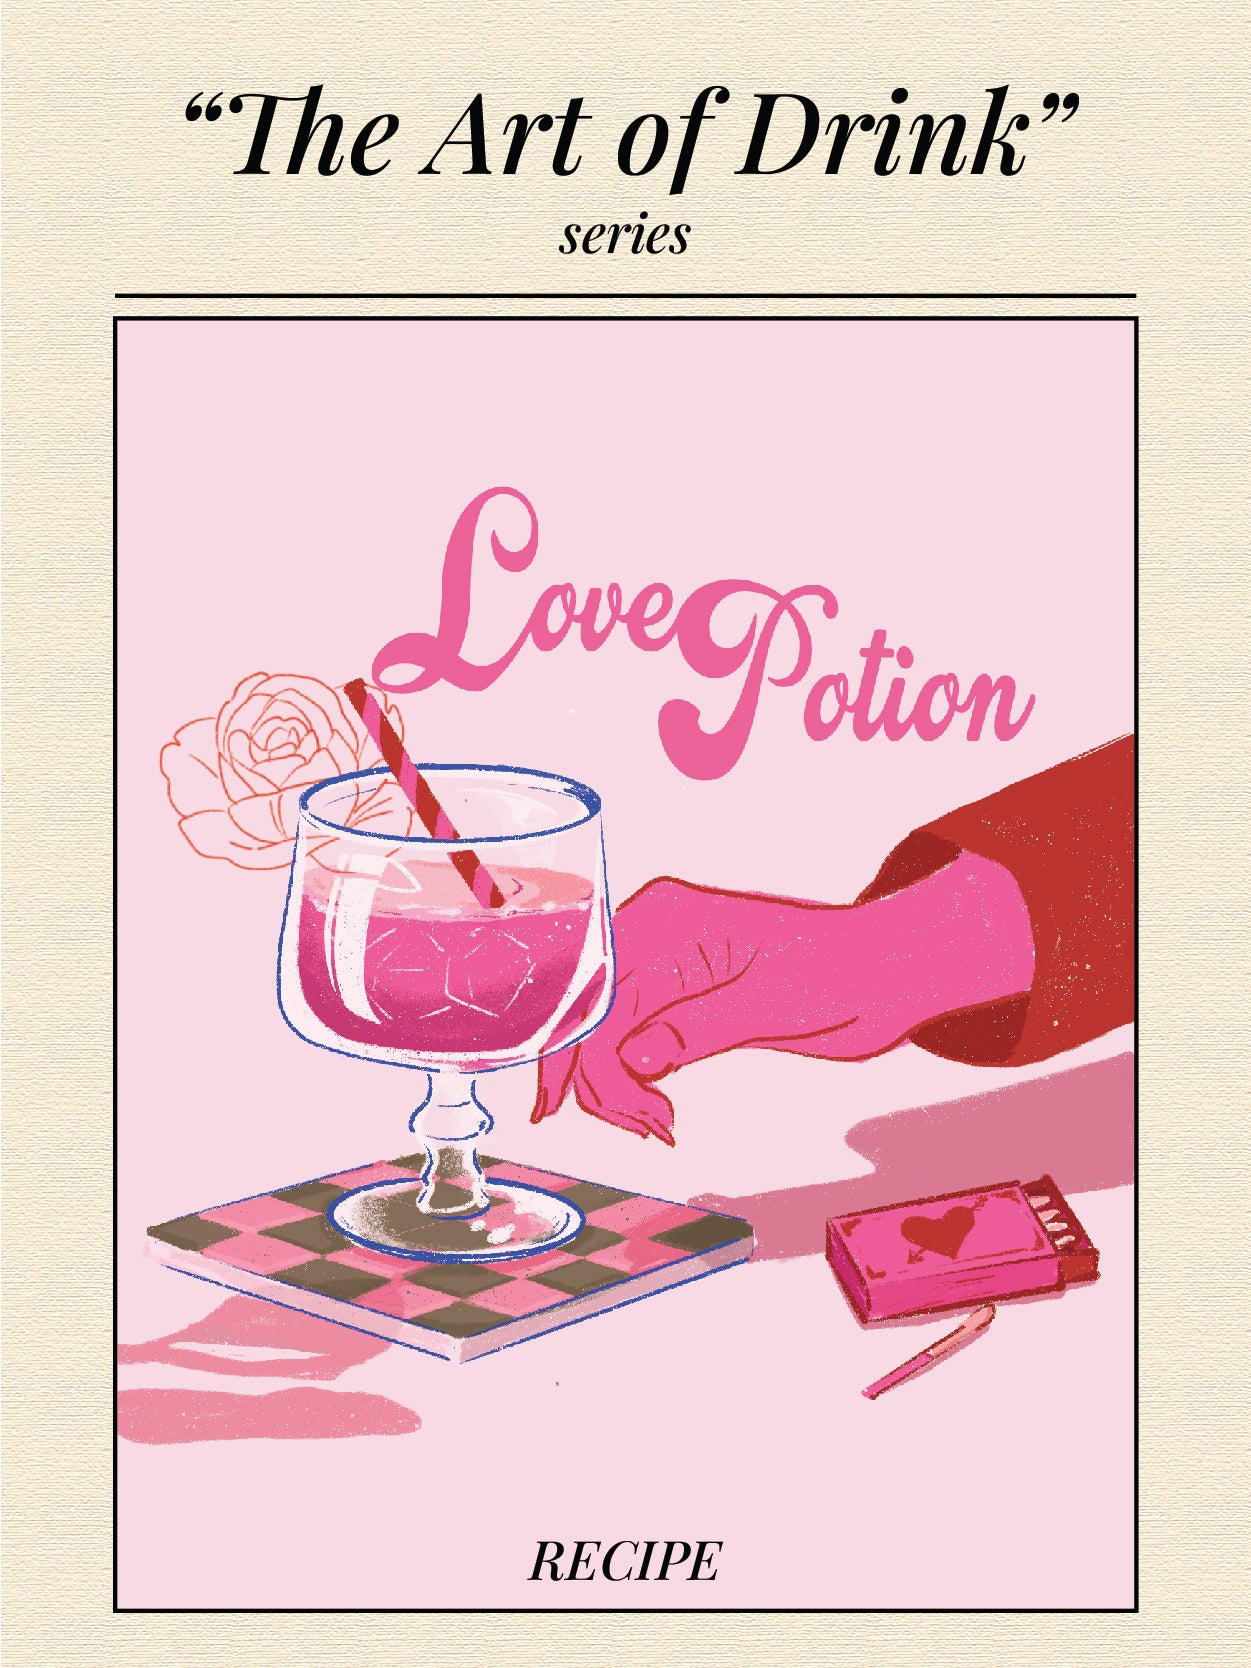 LOVE POTION - "The Art of Drink" series